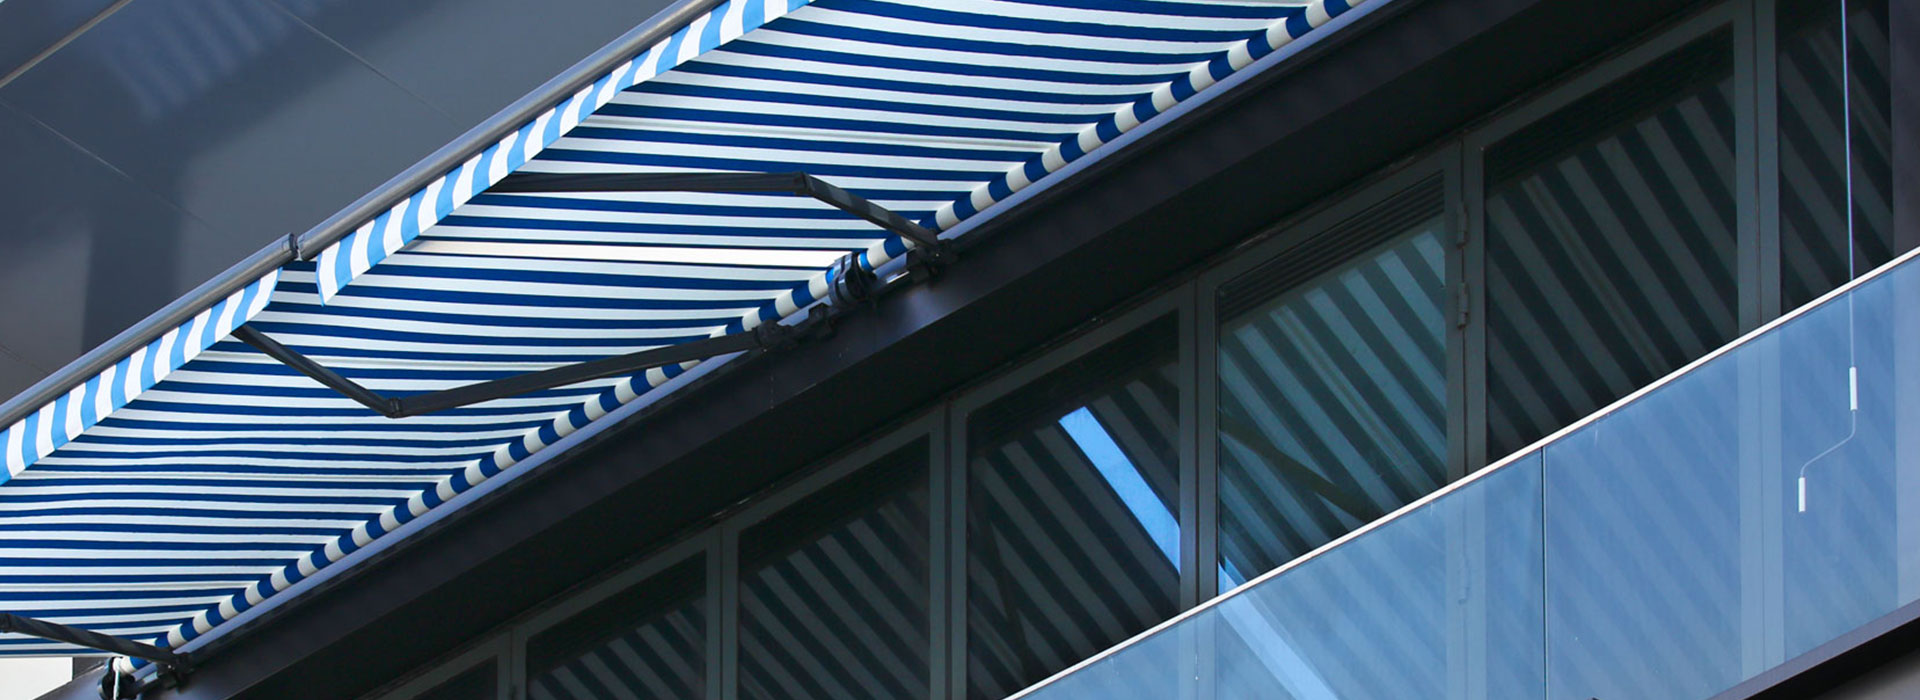 Retractable Awning with Striped Blue & White Fabric Shading a Restaurant in Dubai Festival City